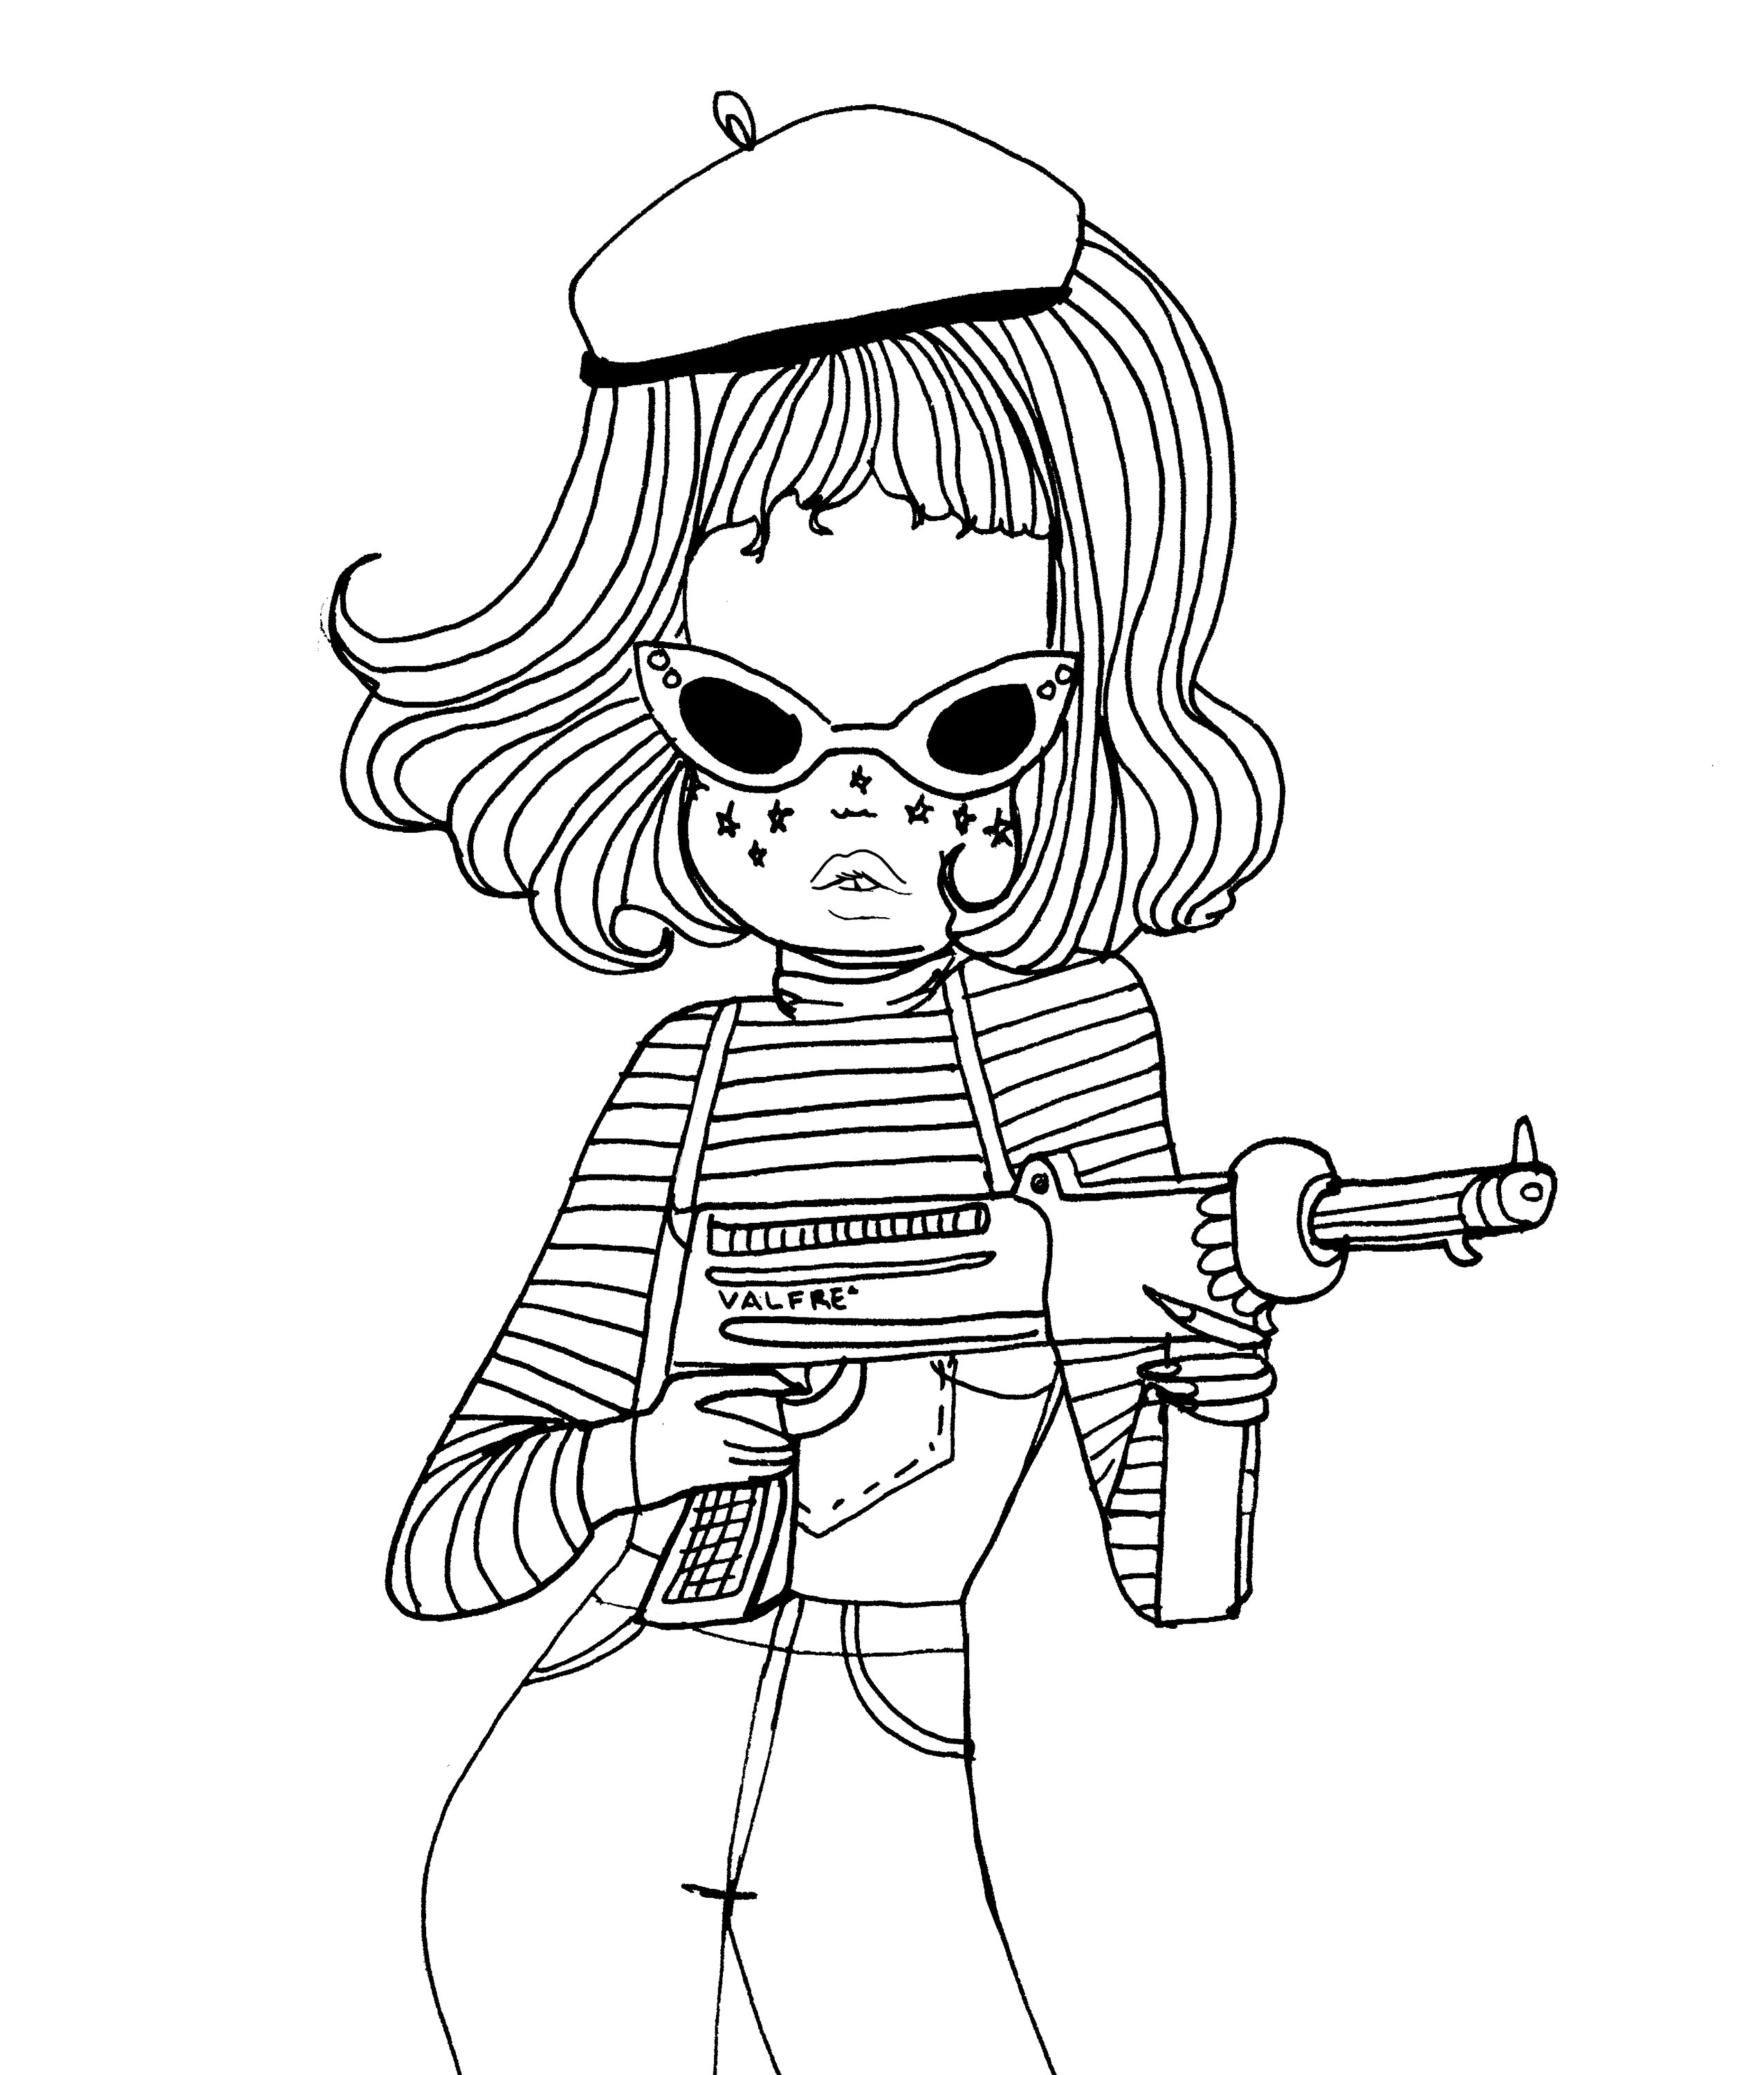 Grunge Cute Aesthetic Coloring Pages - Coloring and Drawing